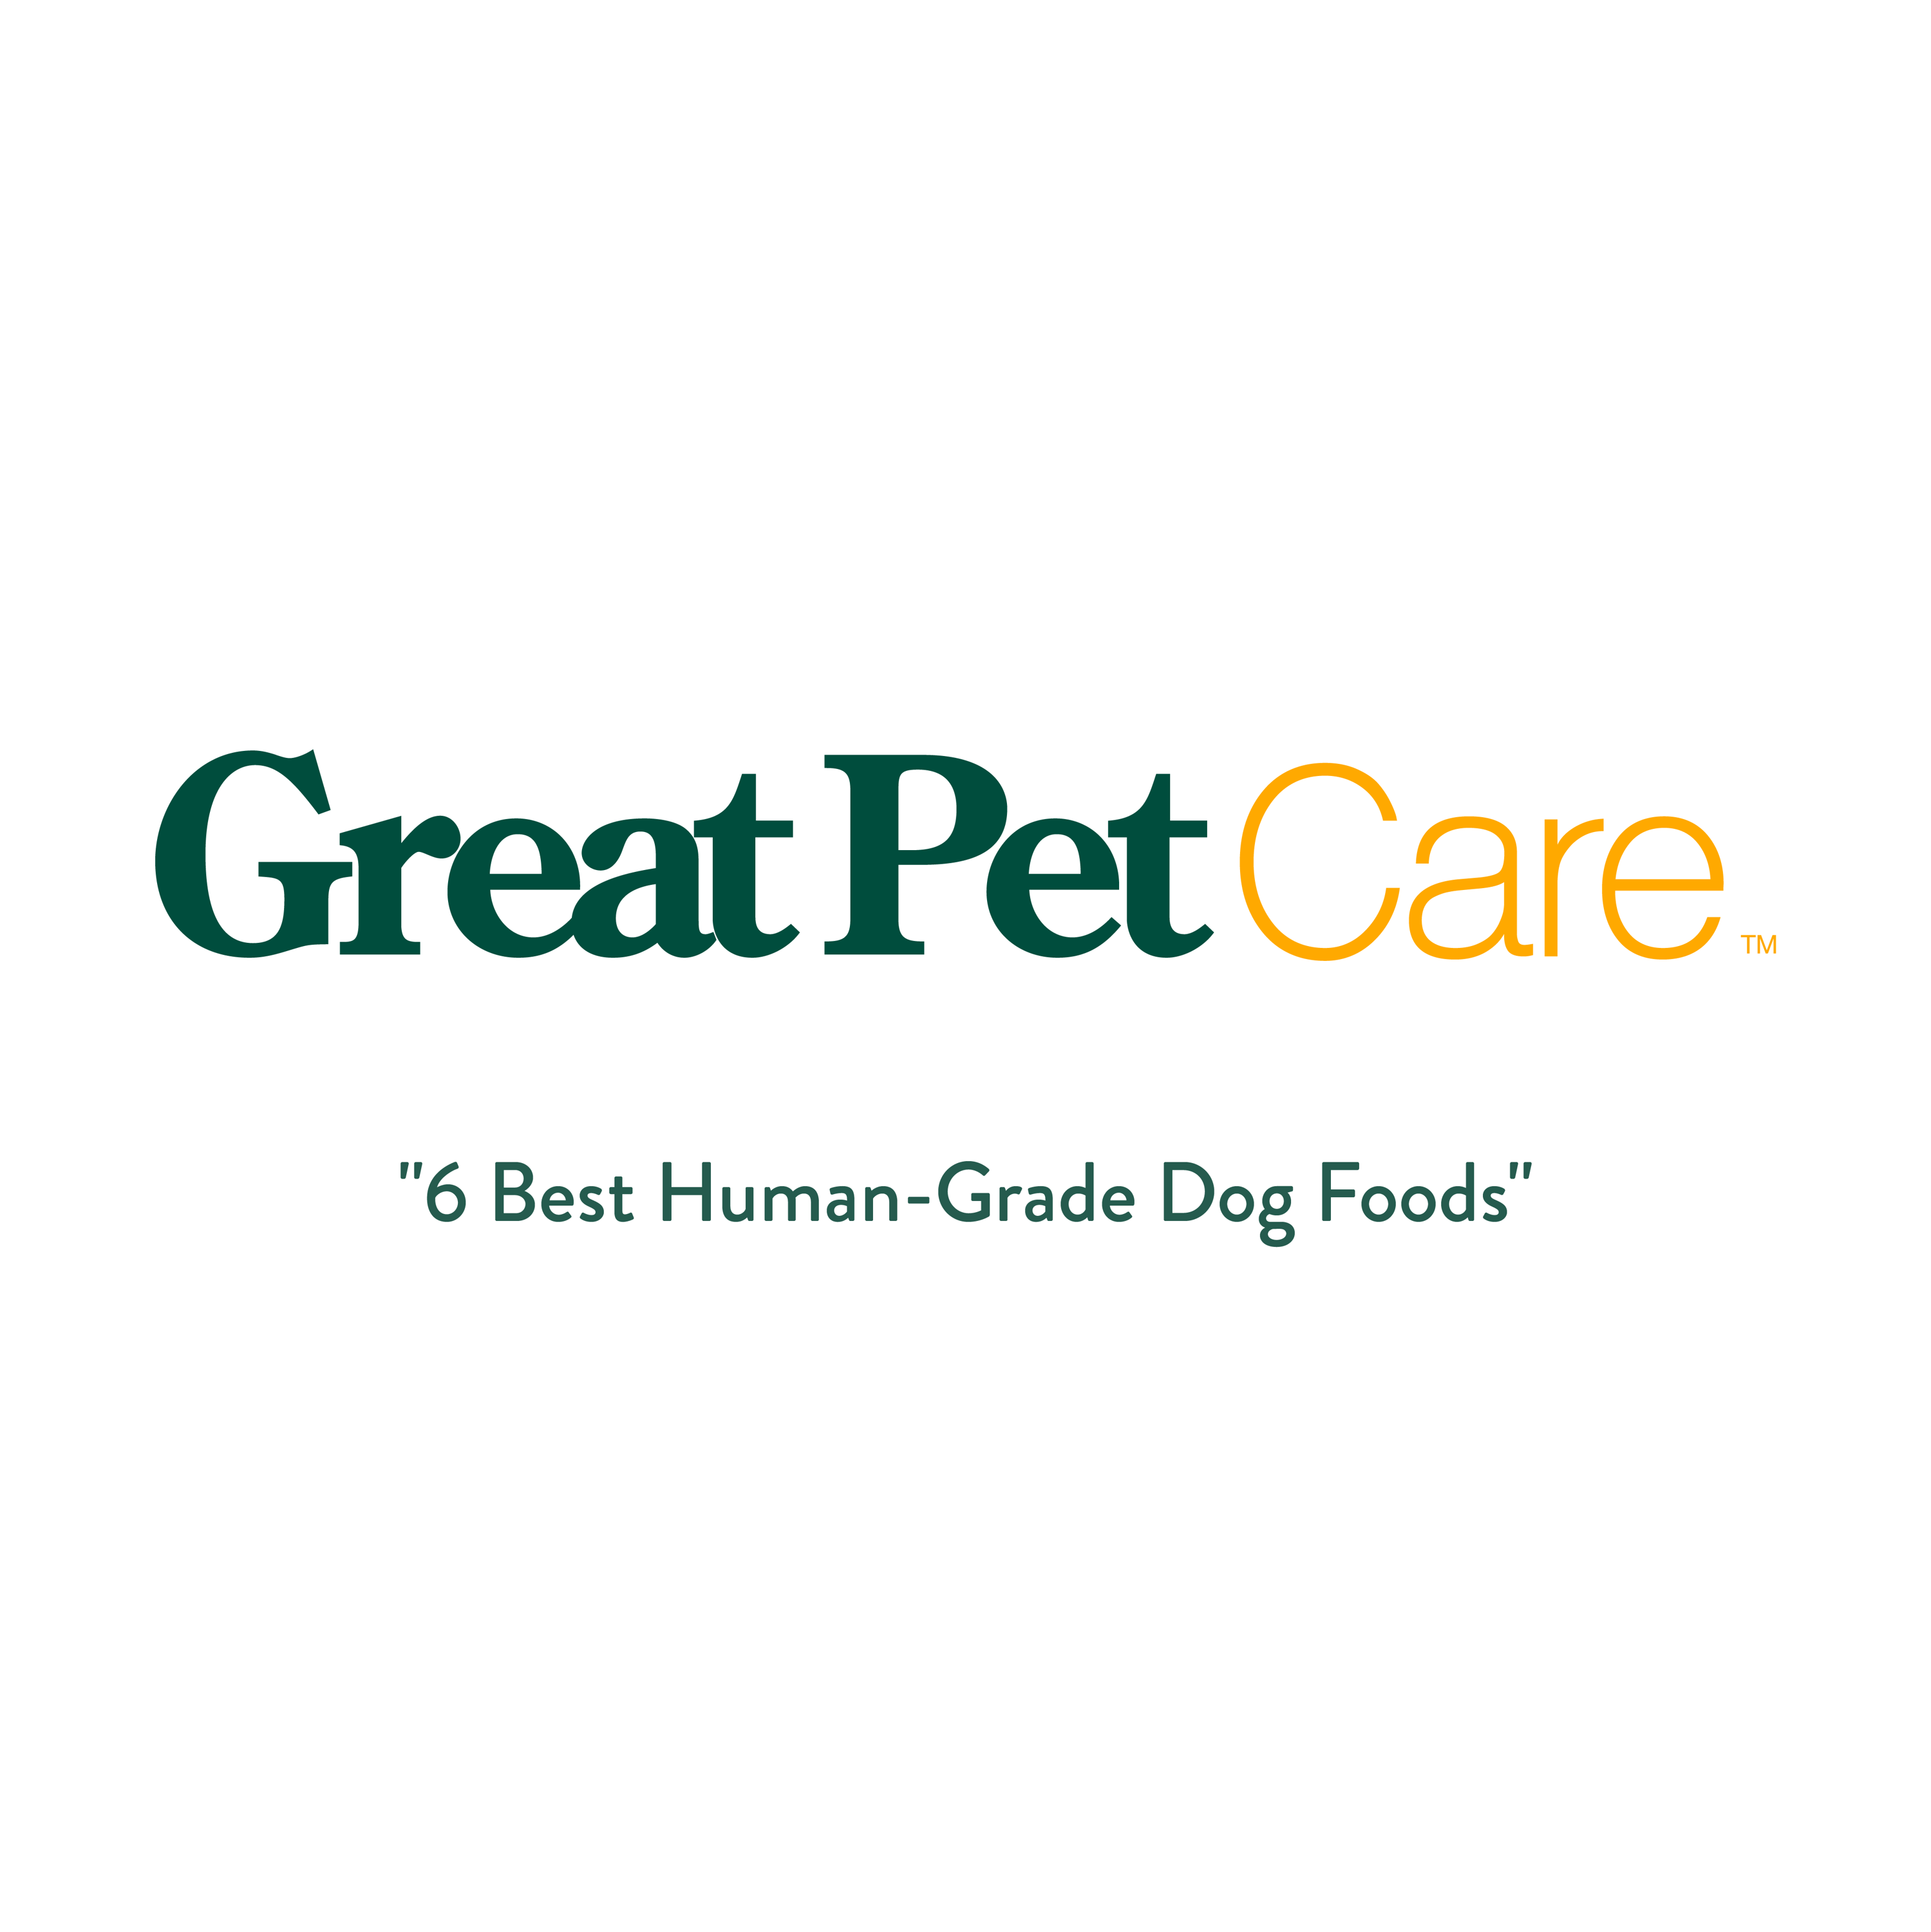 Selected as one of the best human-grade dog foods by Great Pet Care